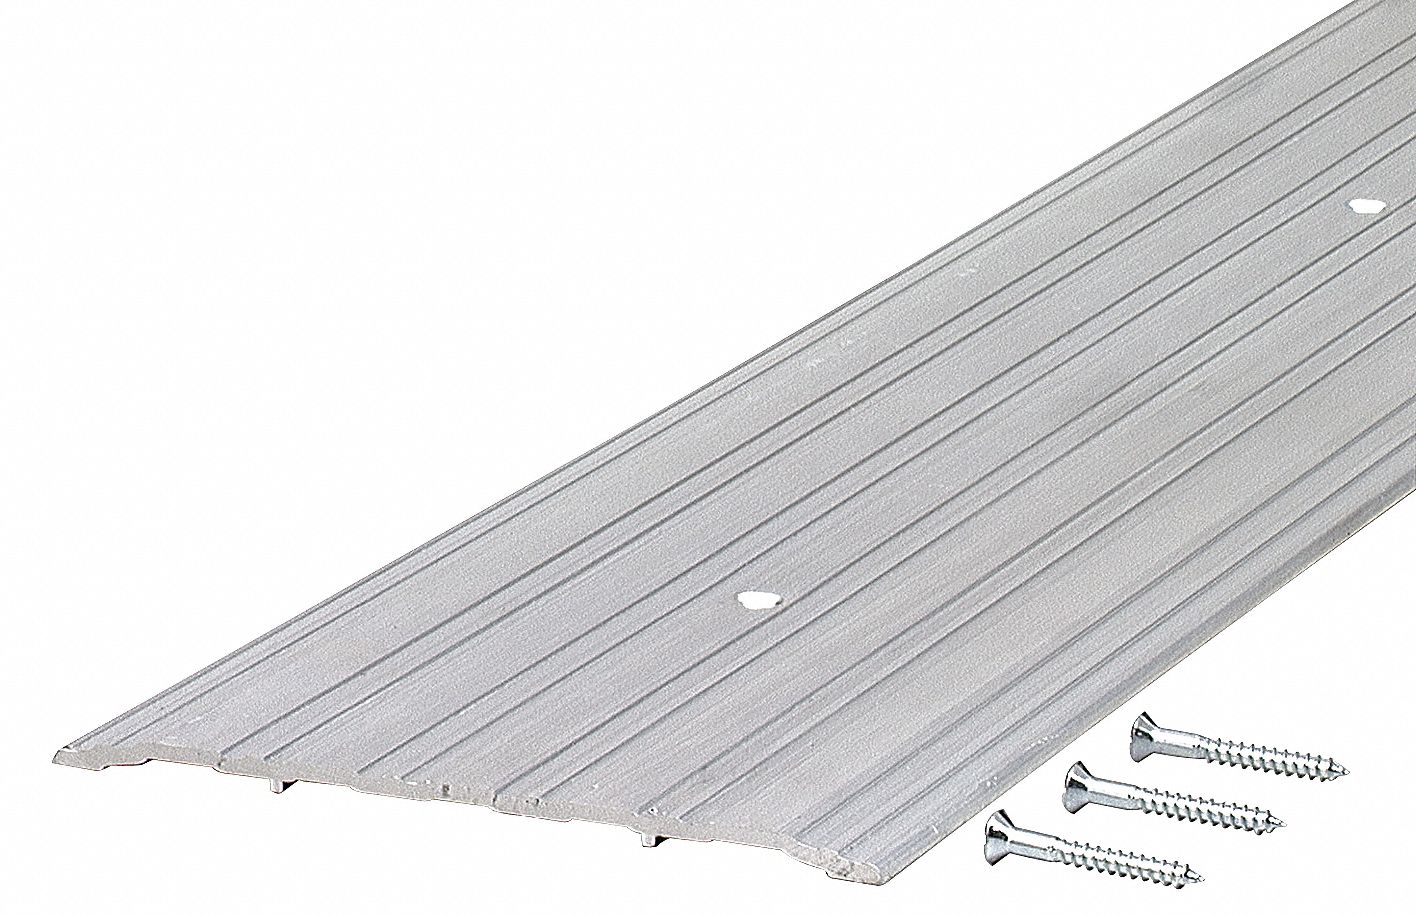 2 1/2 Wide Flat Aluminum Threshold 1/4 High Made in USA by Randall Part Number A-70-M 6 FT Long